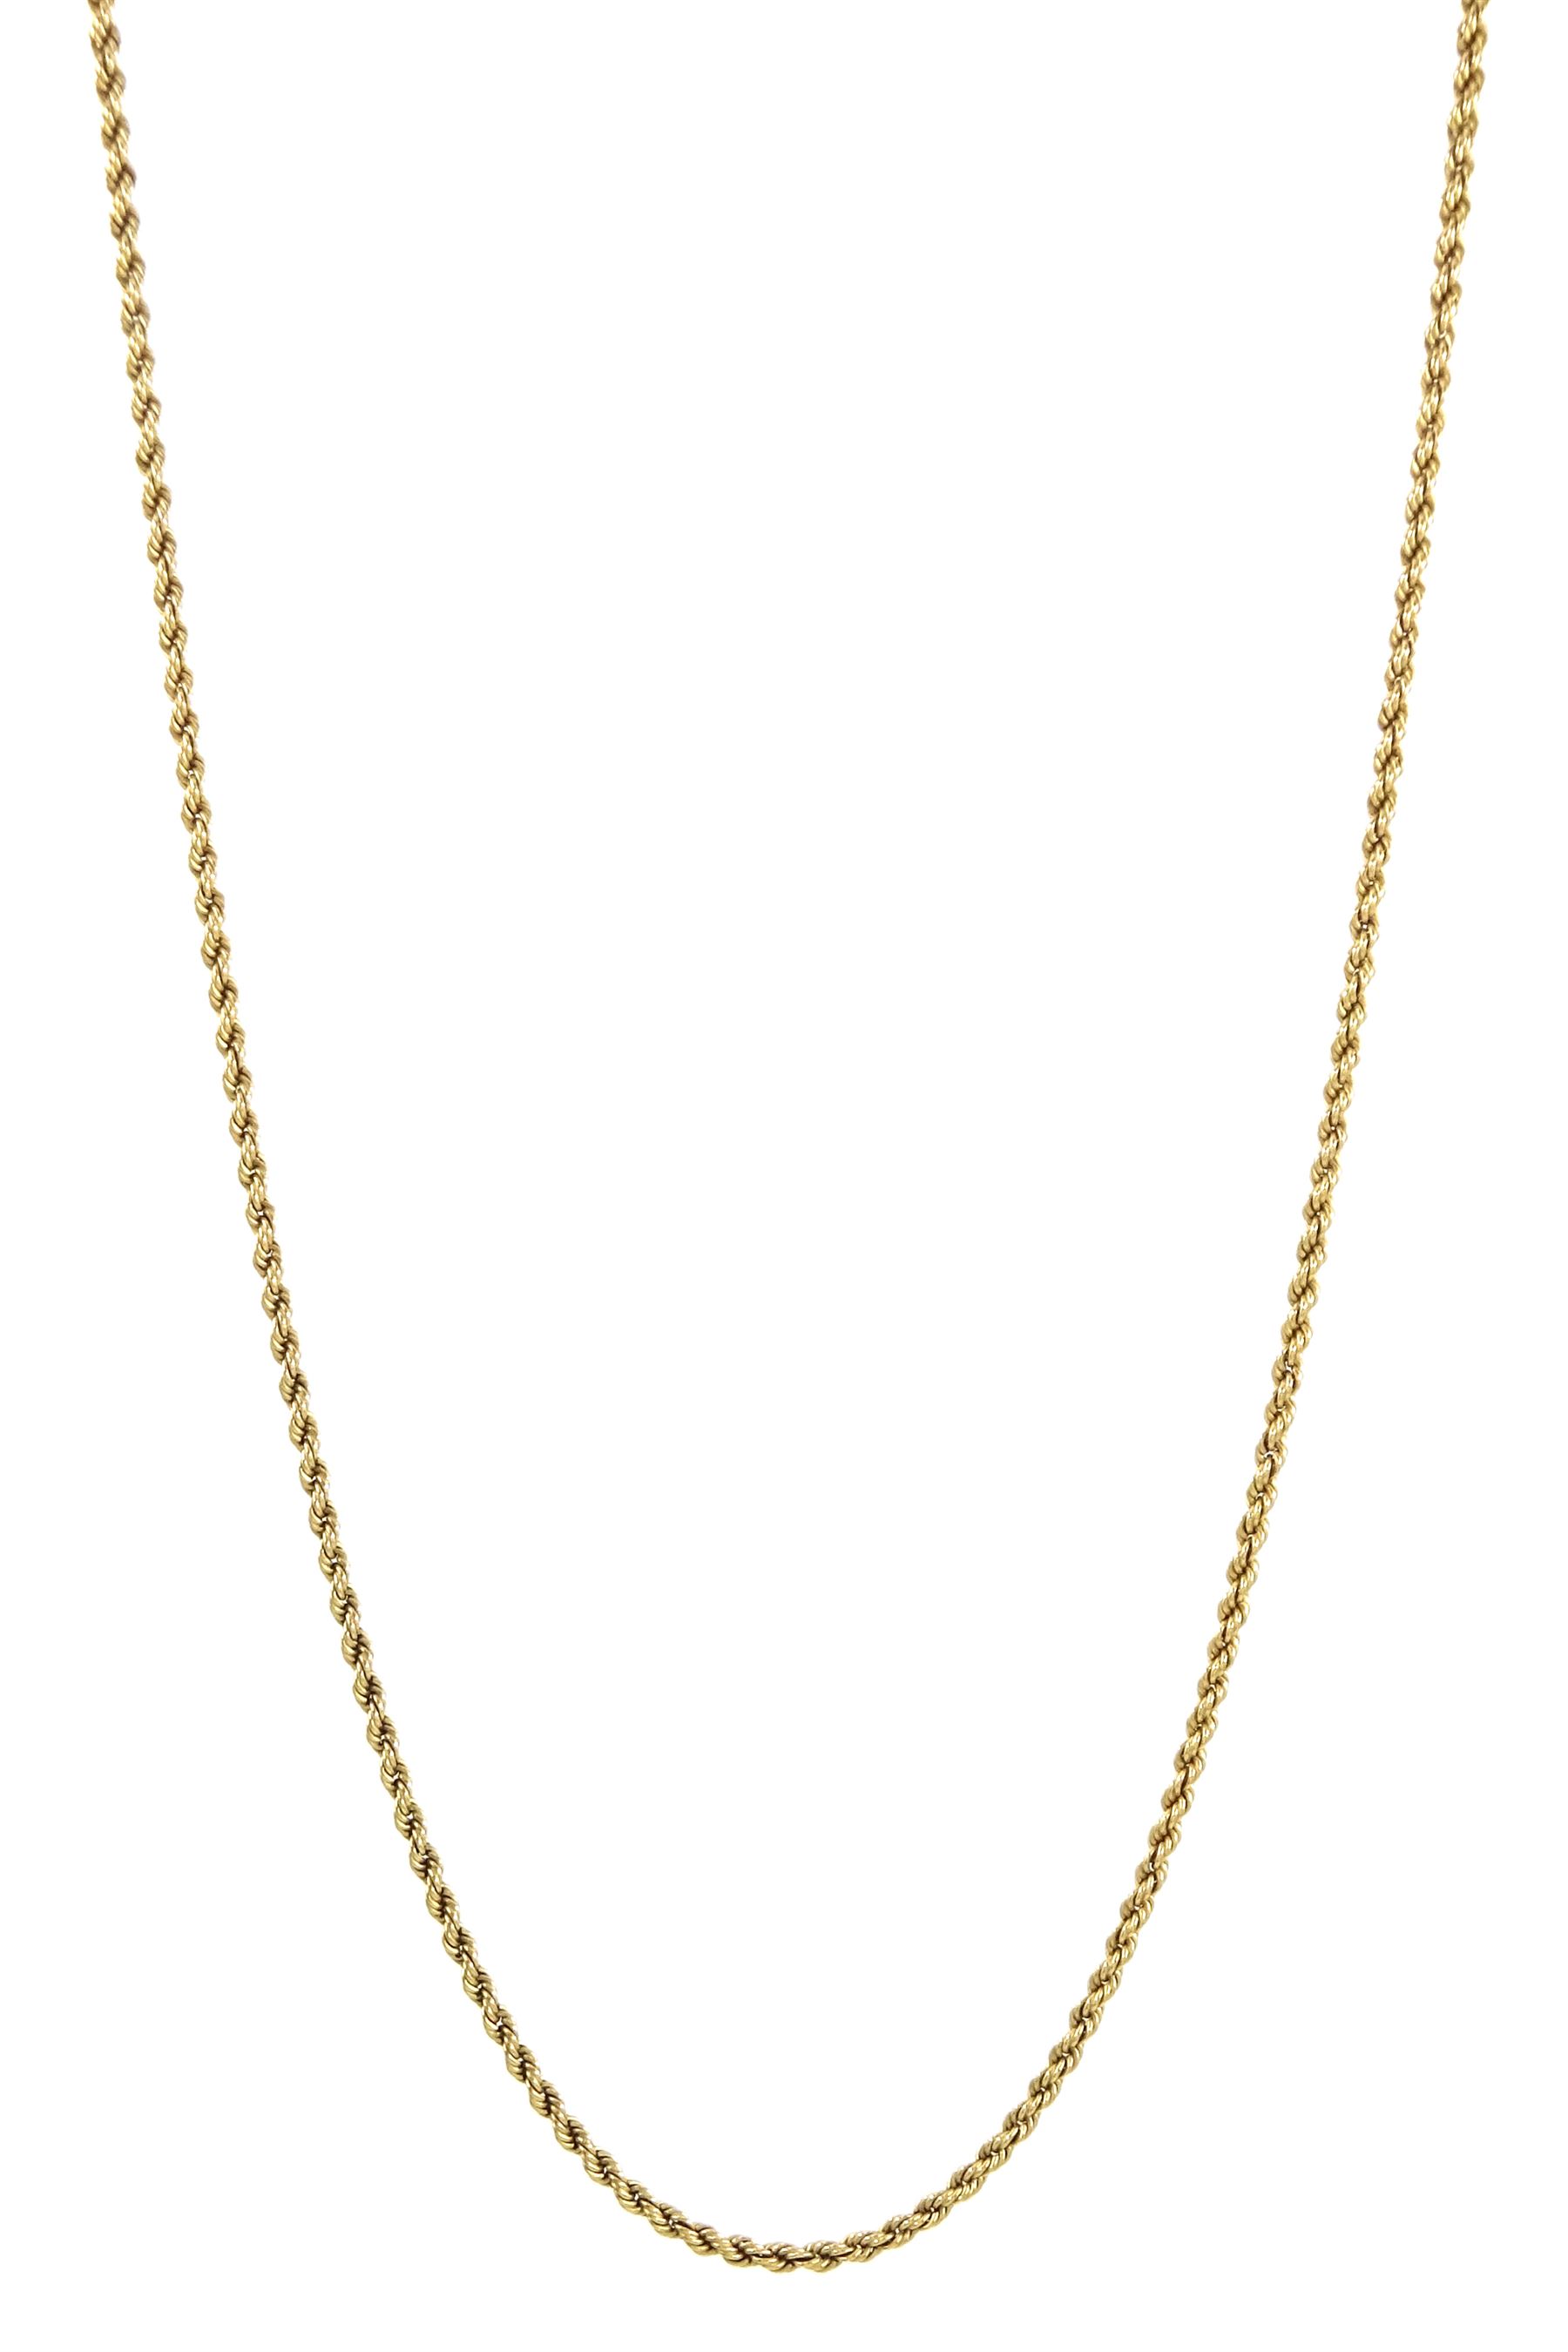 18ct gold rope twist chain necklace